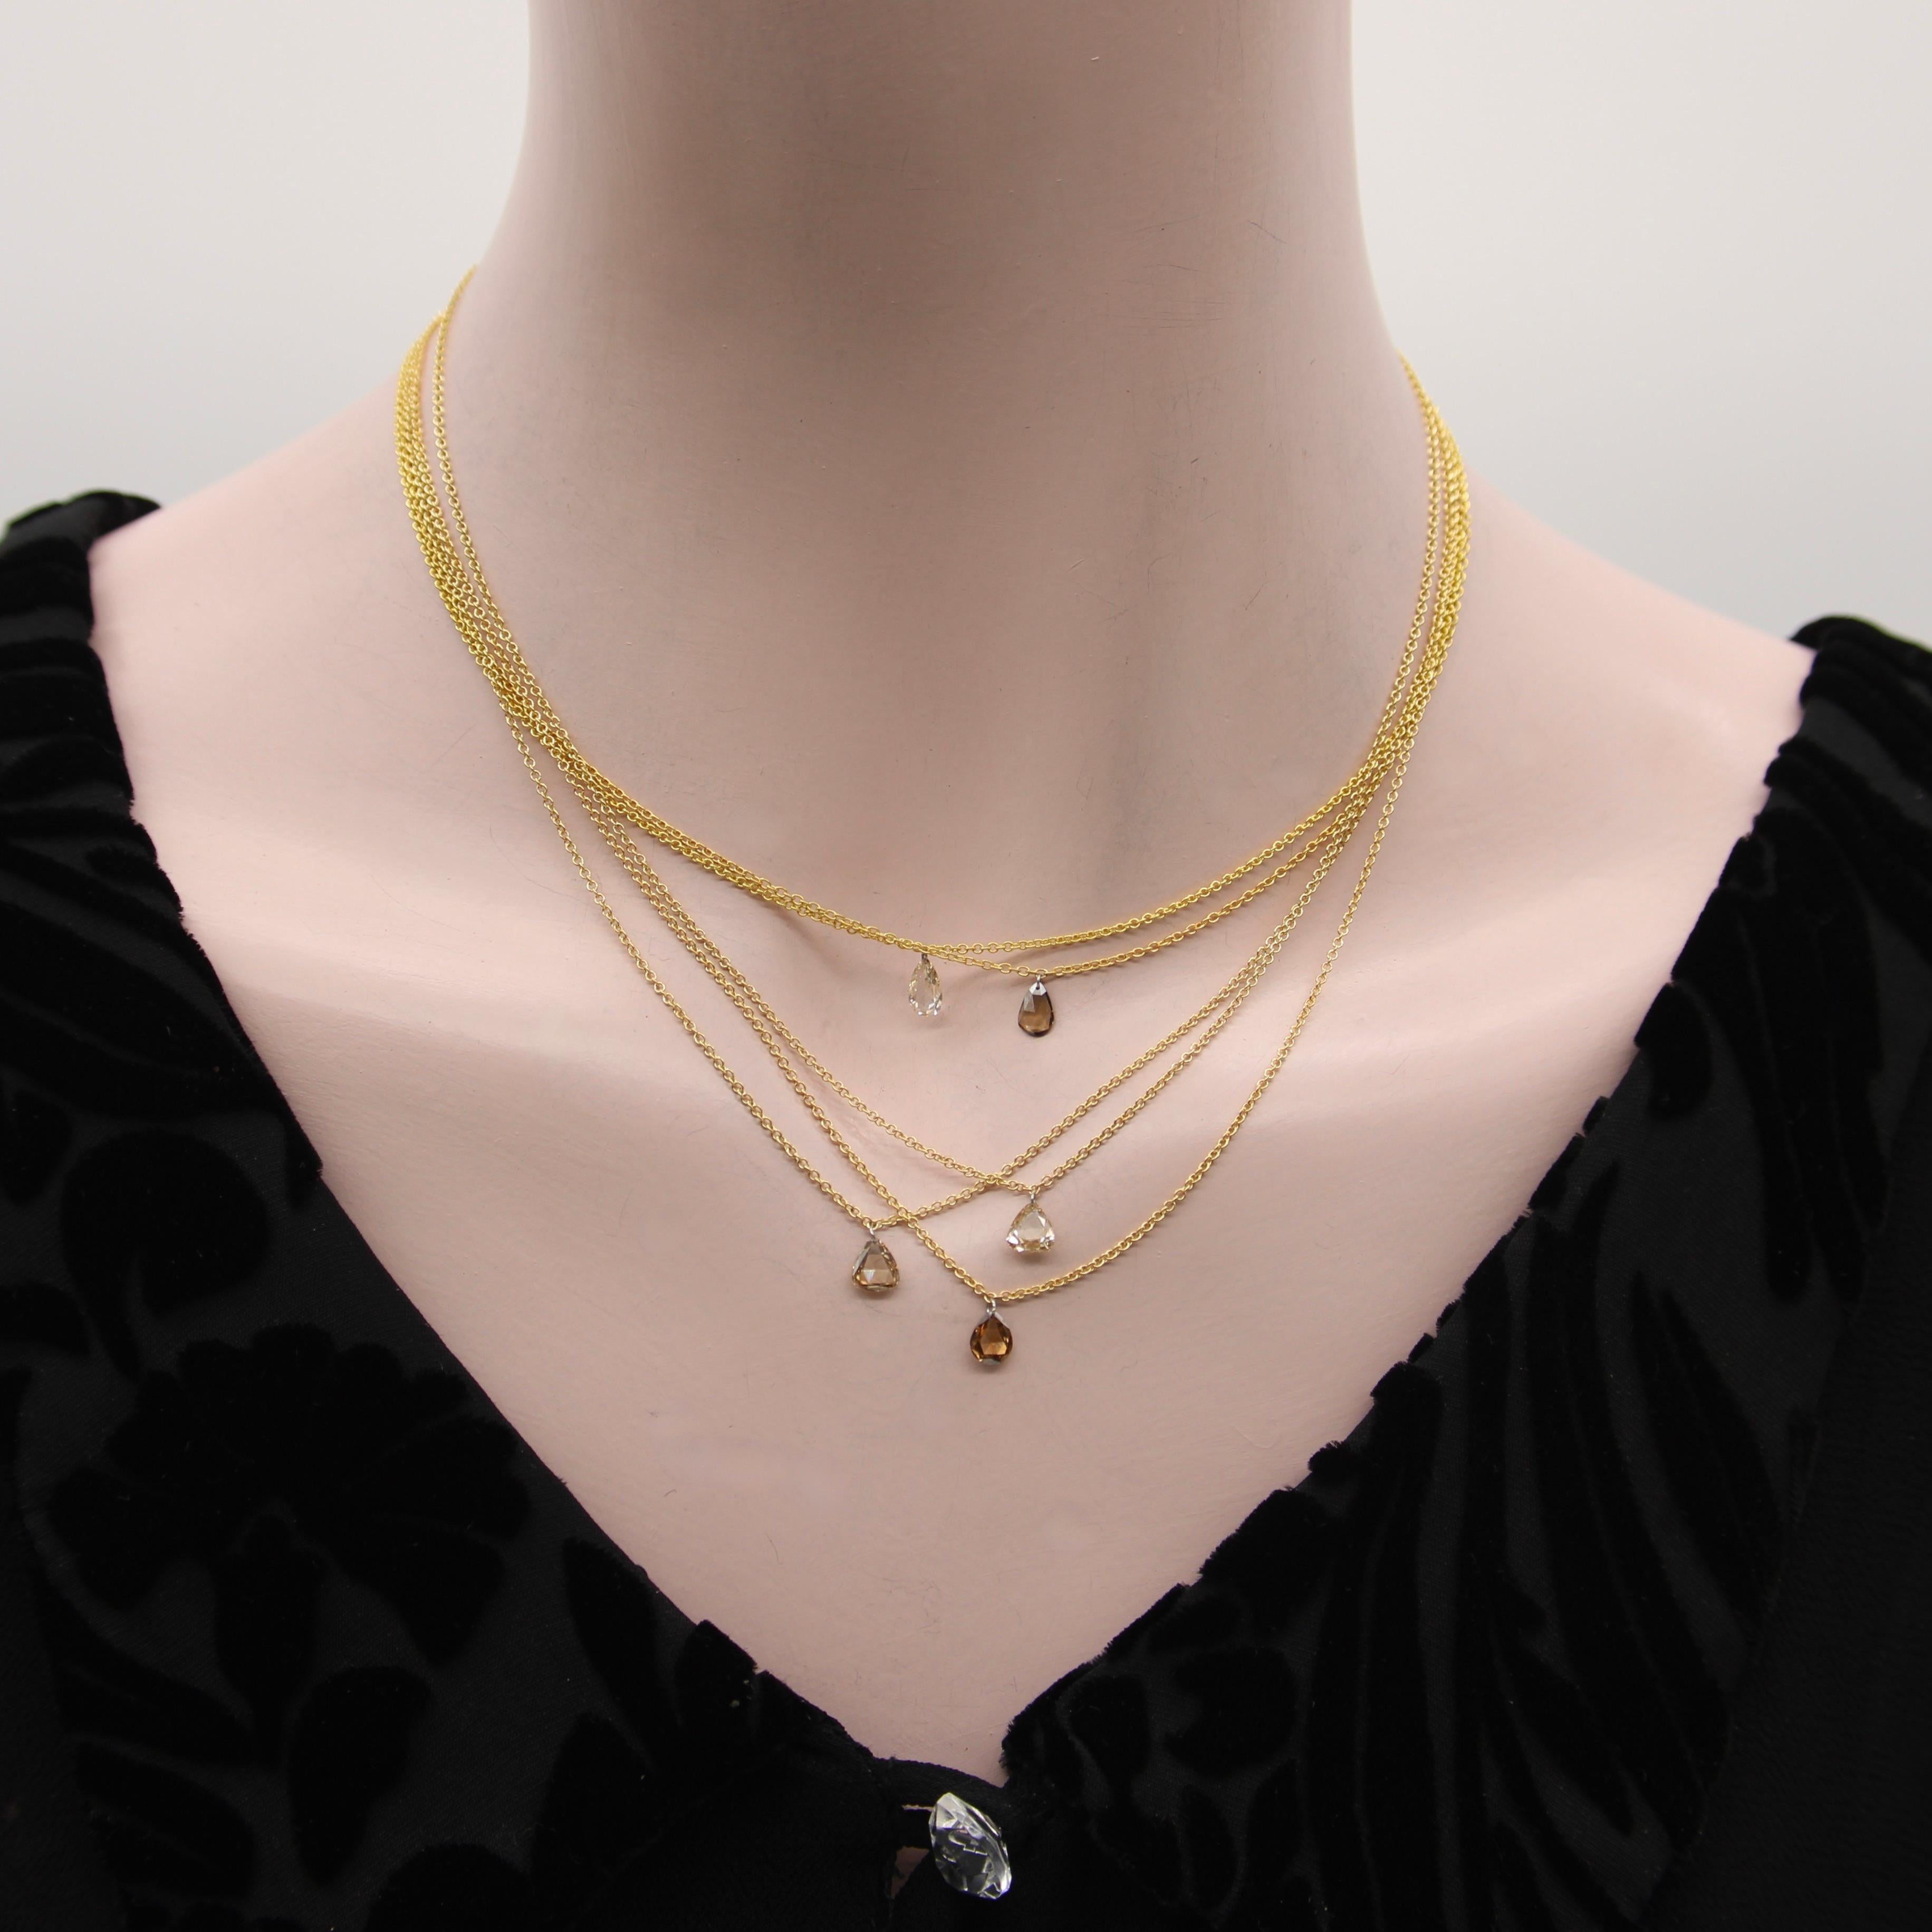 Dangling Pear Shaped Cognac Rose Cut Diamond on 14K Gold Chain  For Sale 3